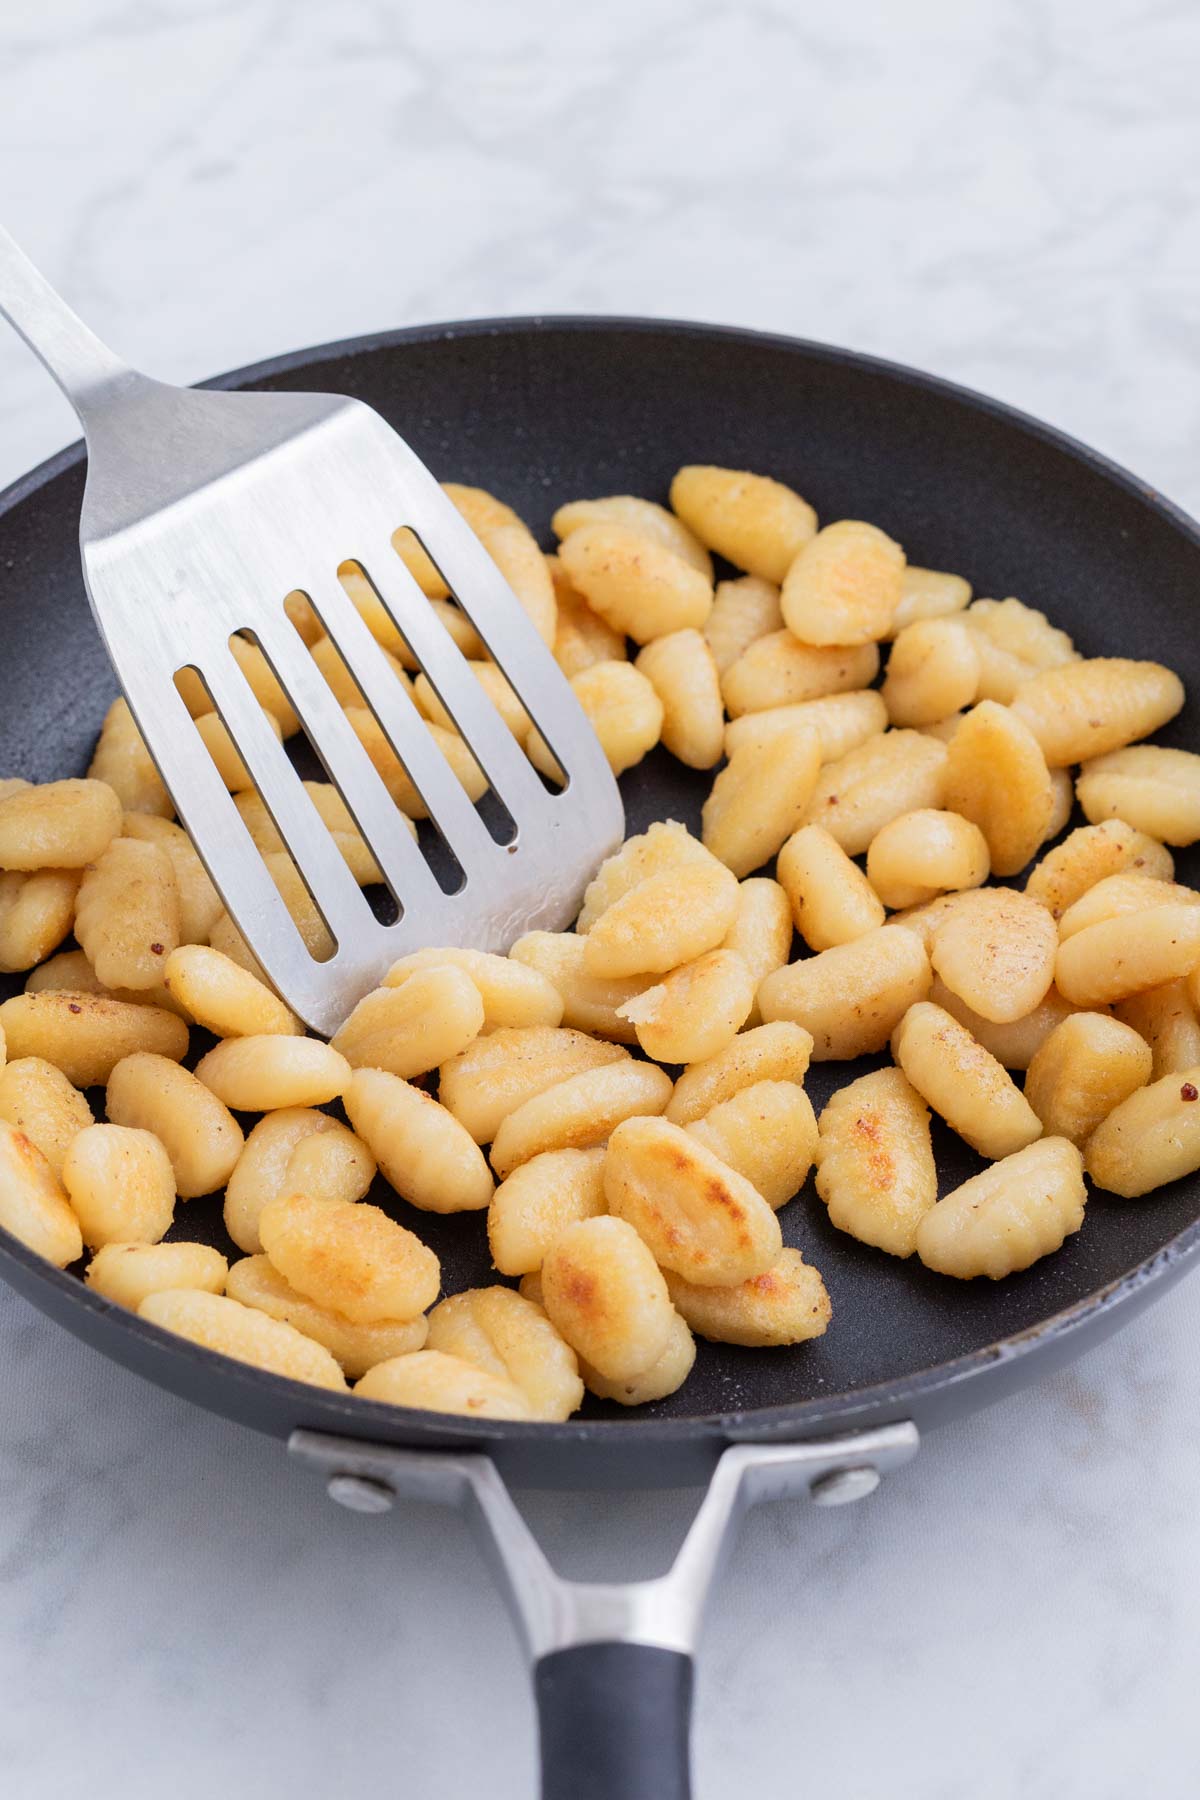 Gnocchi is seared in a skillet.